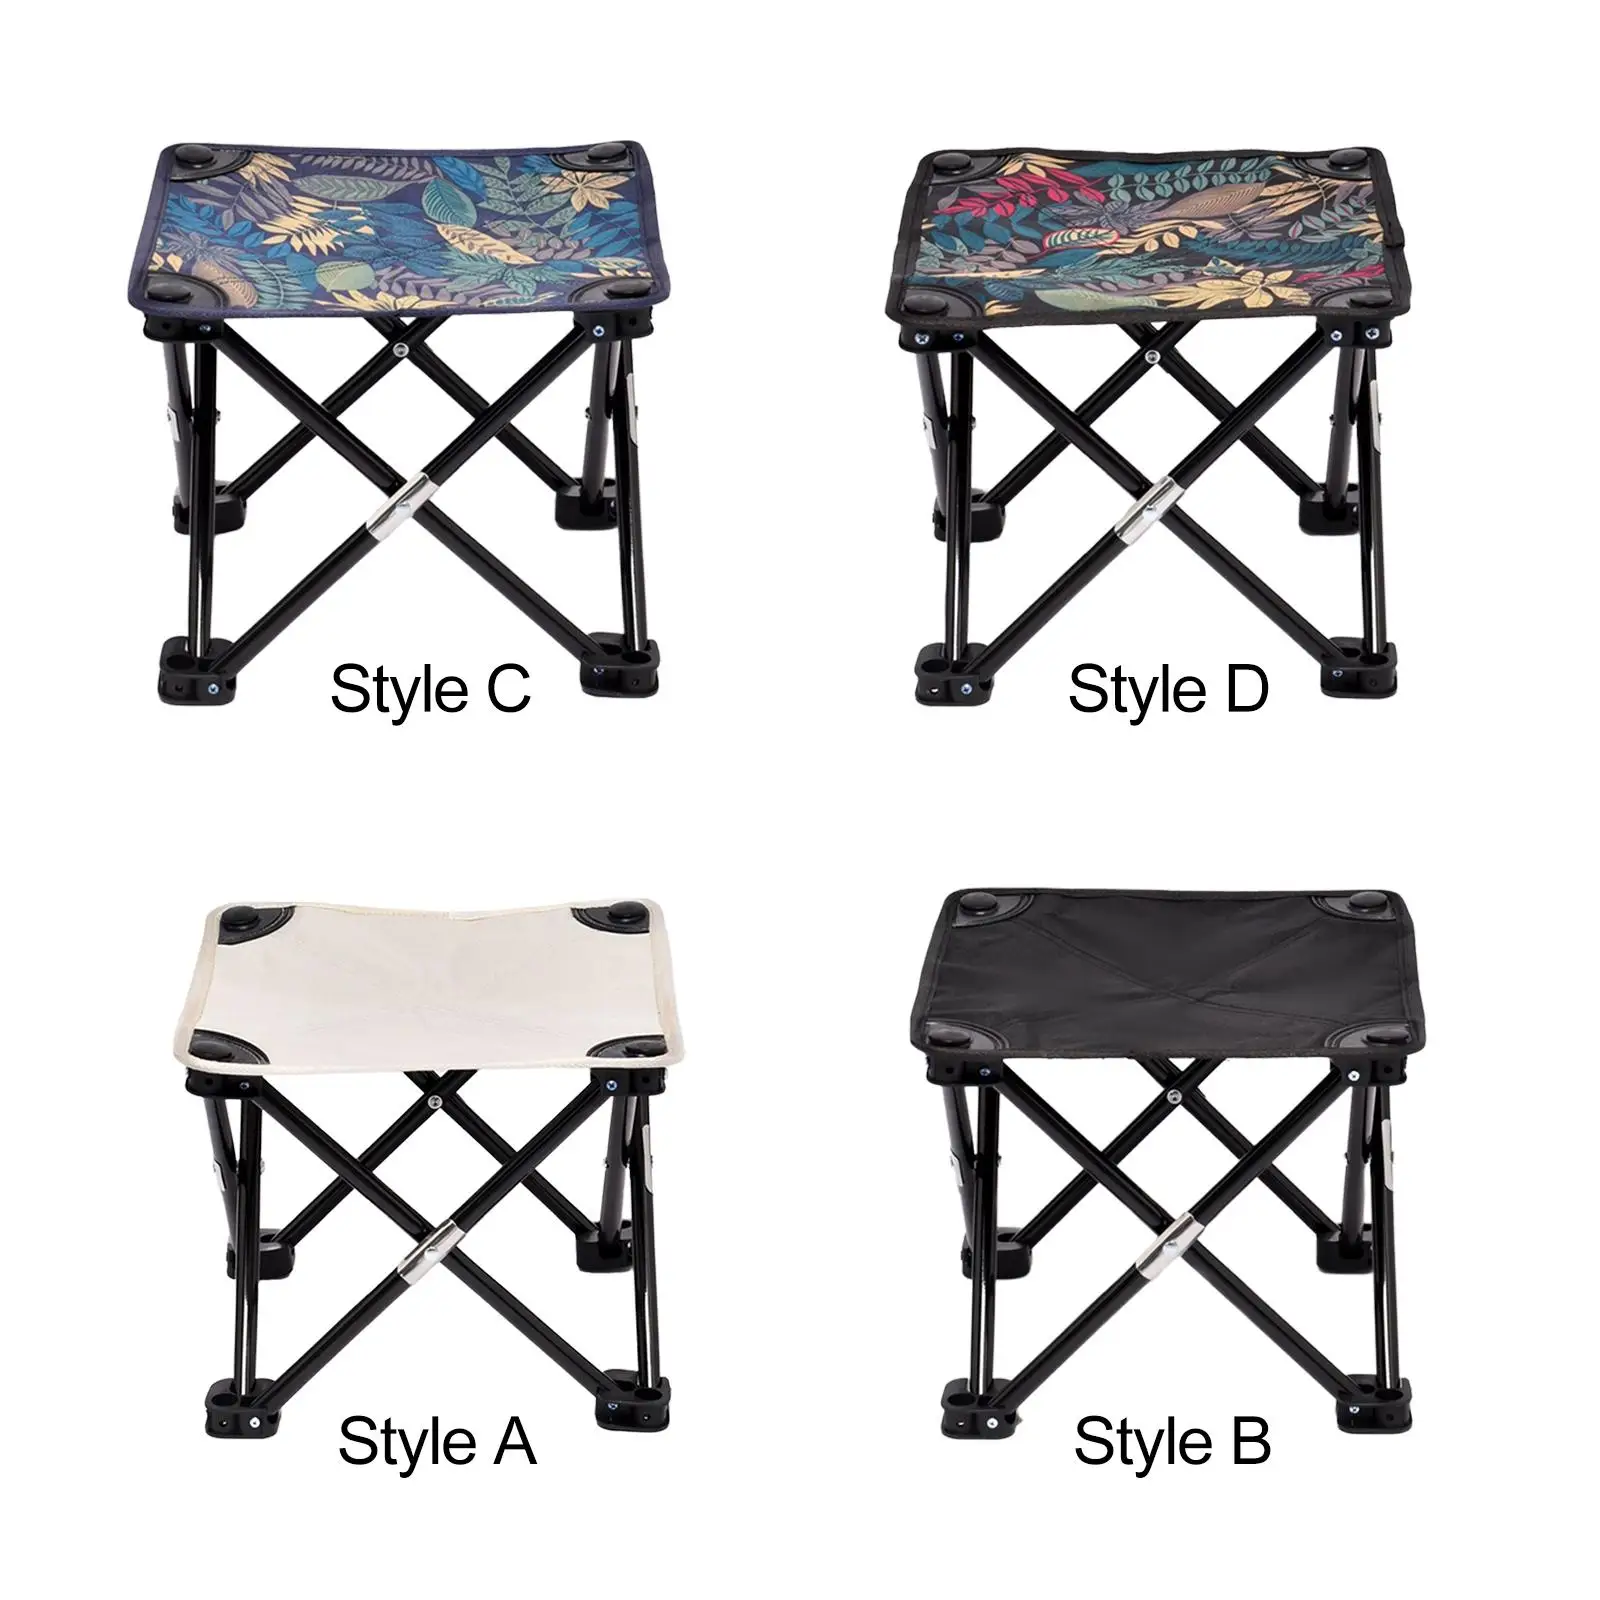 Folding Stools Chair Footrest Aluminum Alloy Portable Camp Stool Collapsible Stool for Patio Backpacking Travel Hiking Picnic